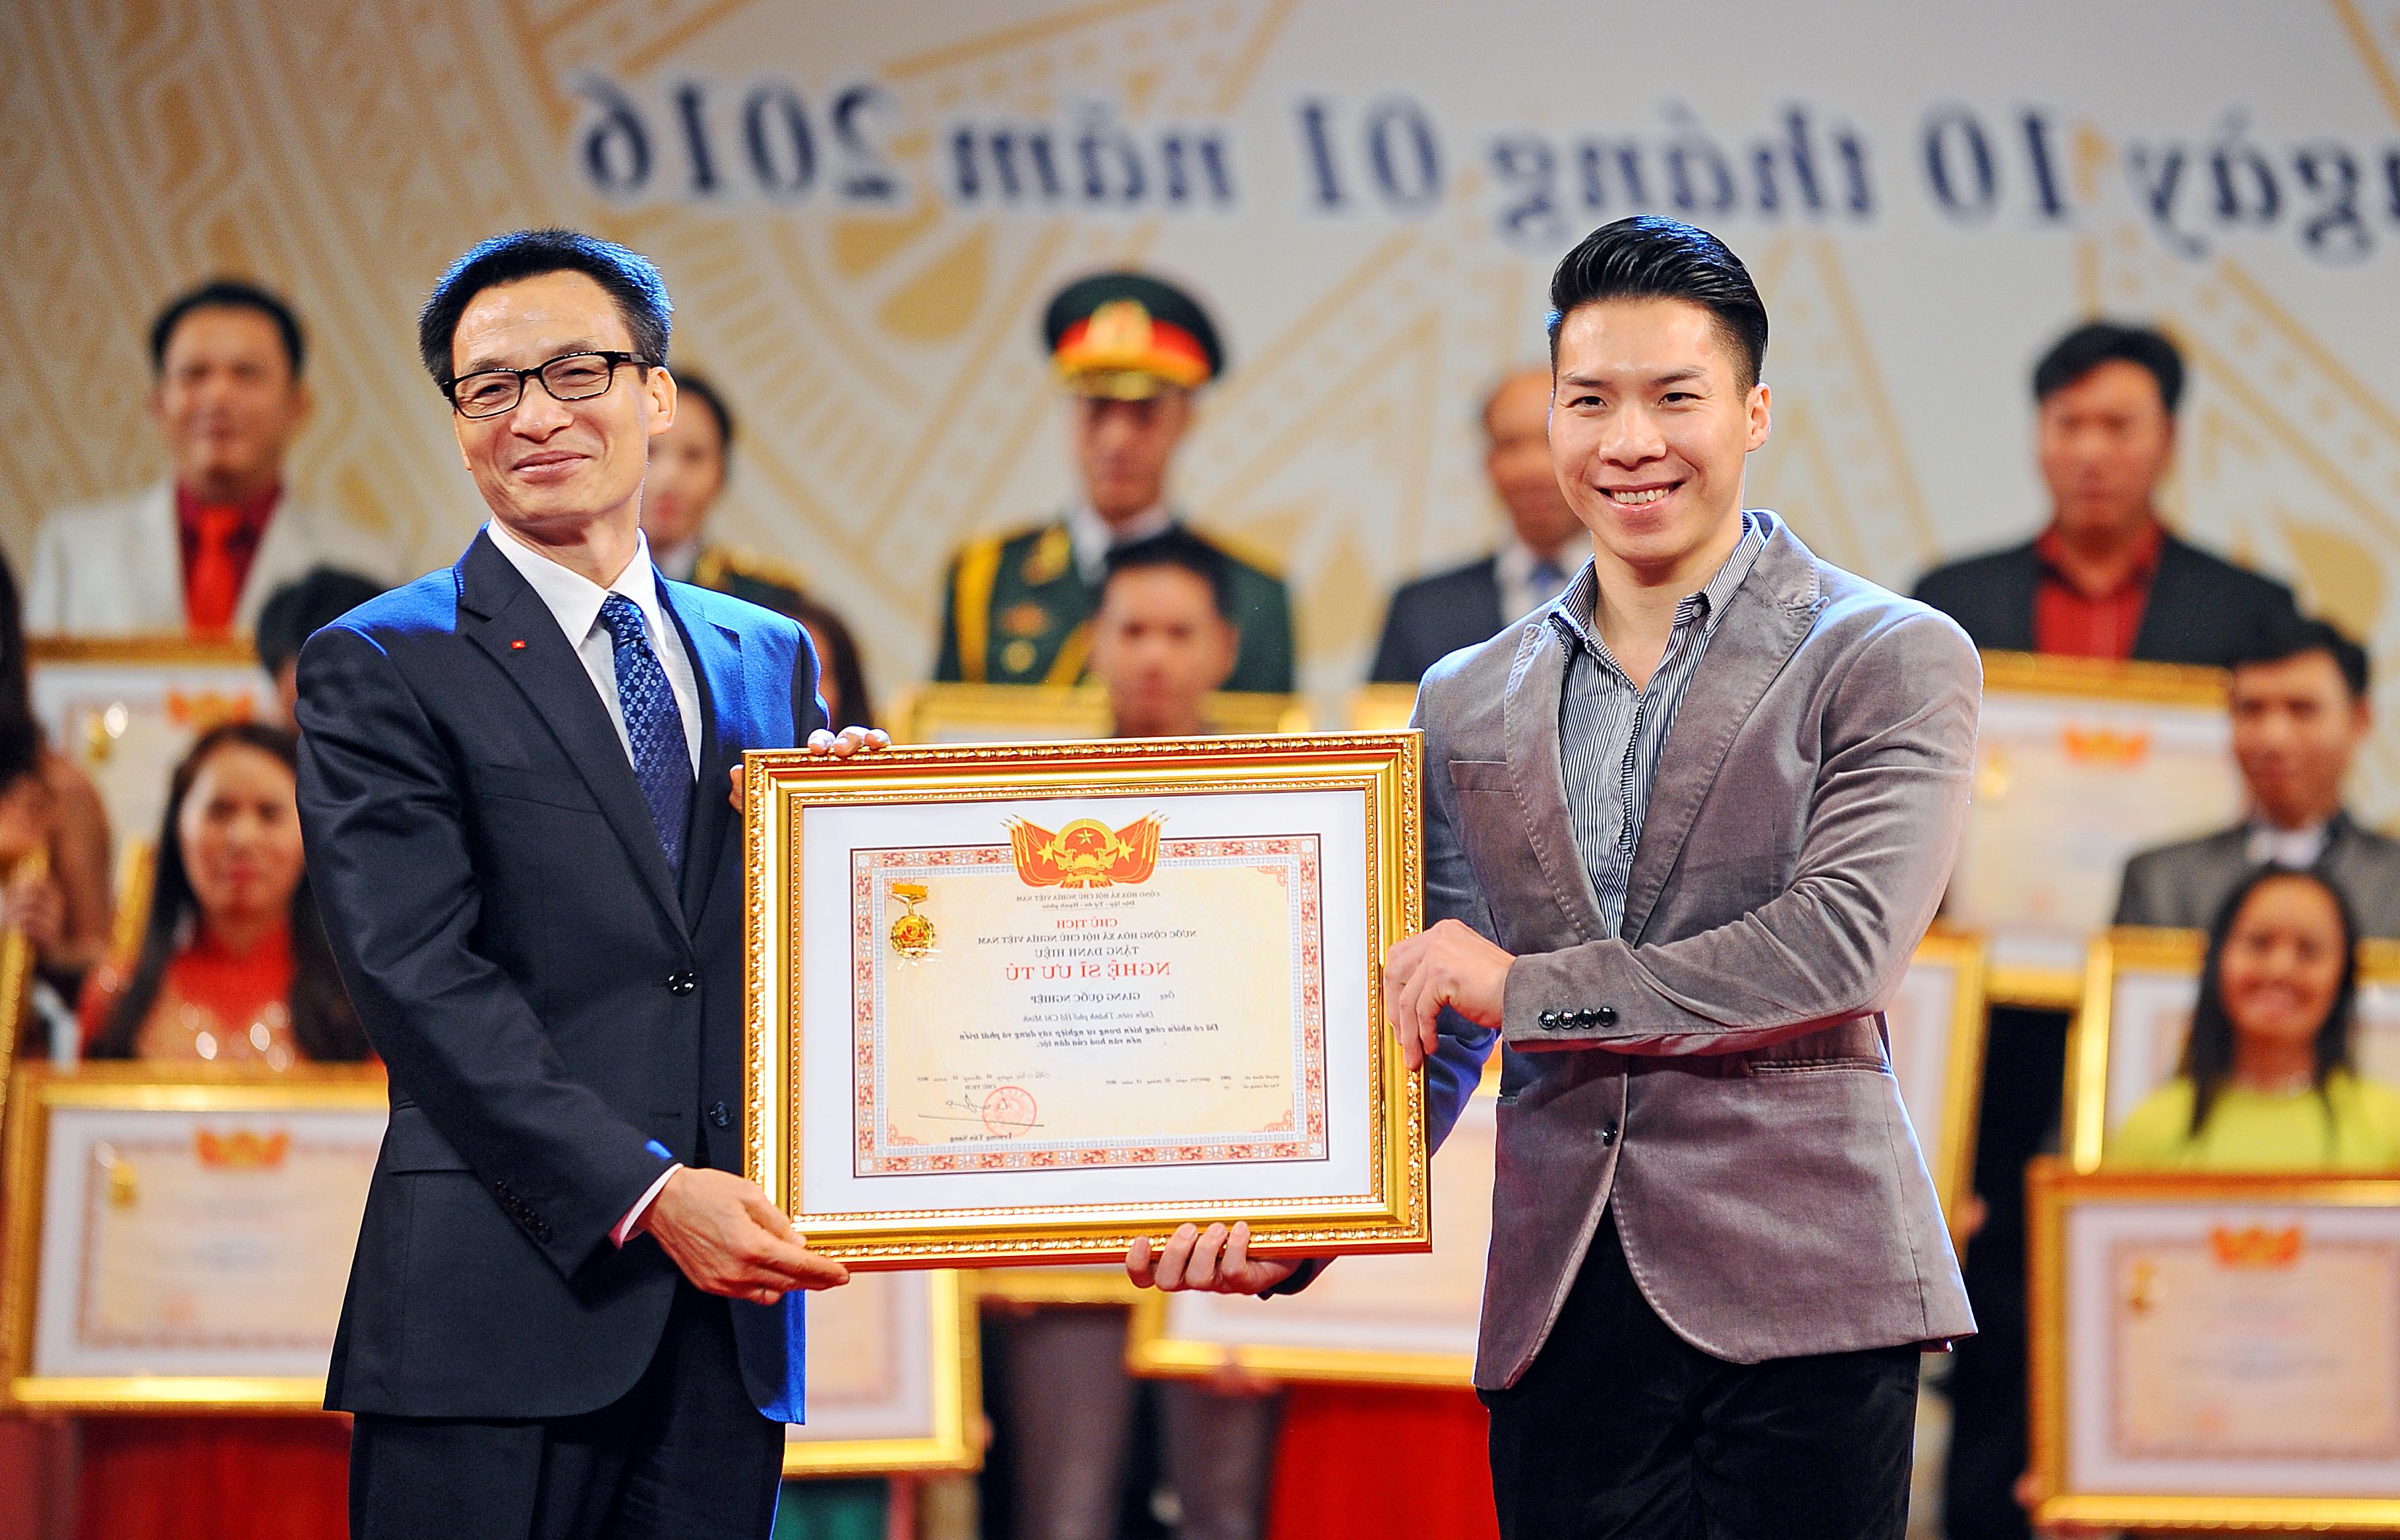  Giang Quoc Nghiep were awarded the title of Outstanding Artist by Deputy Prime Minister Vu Duc Dam